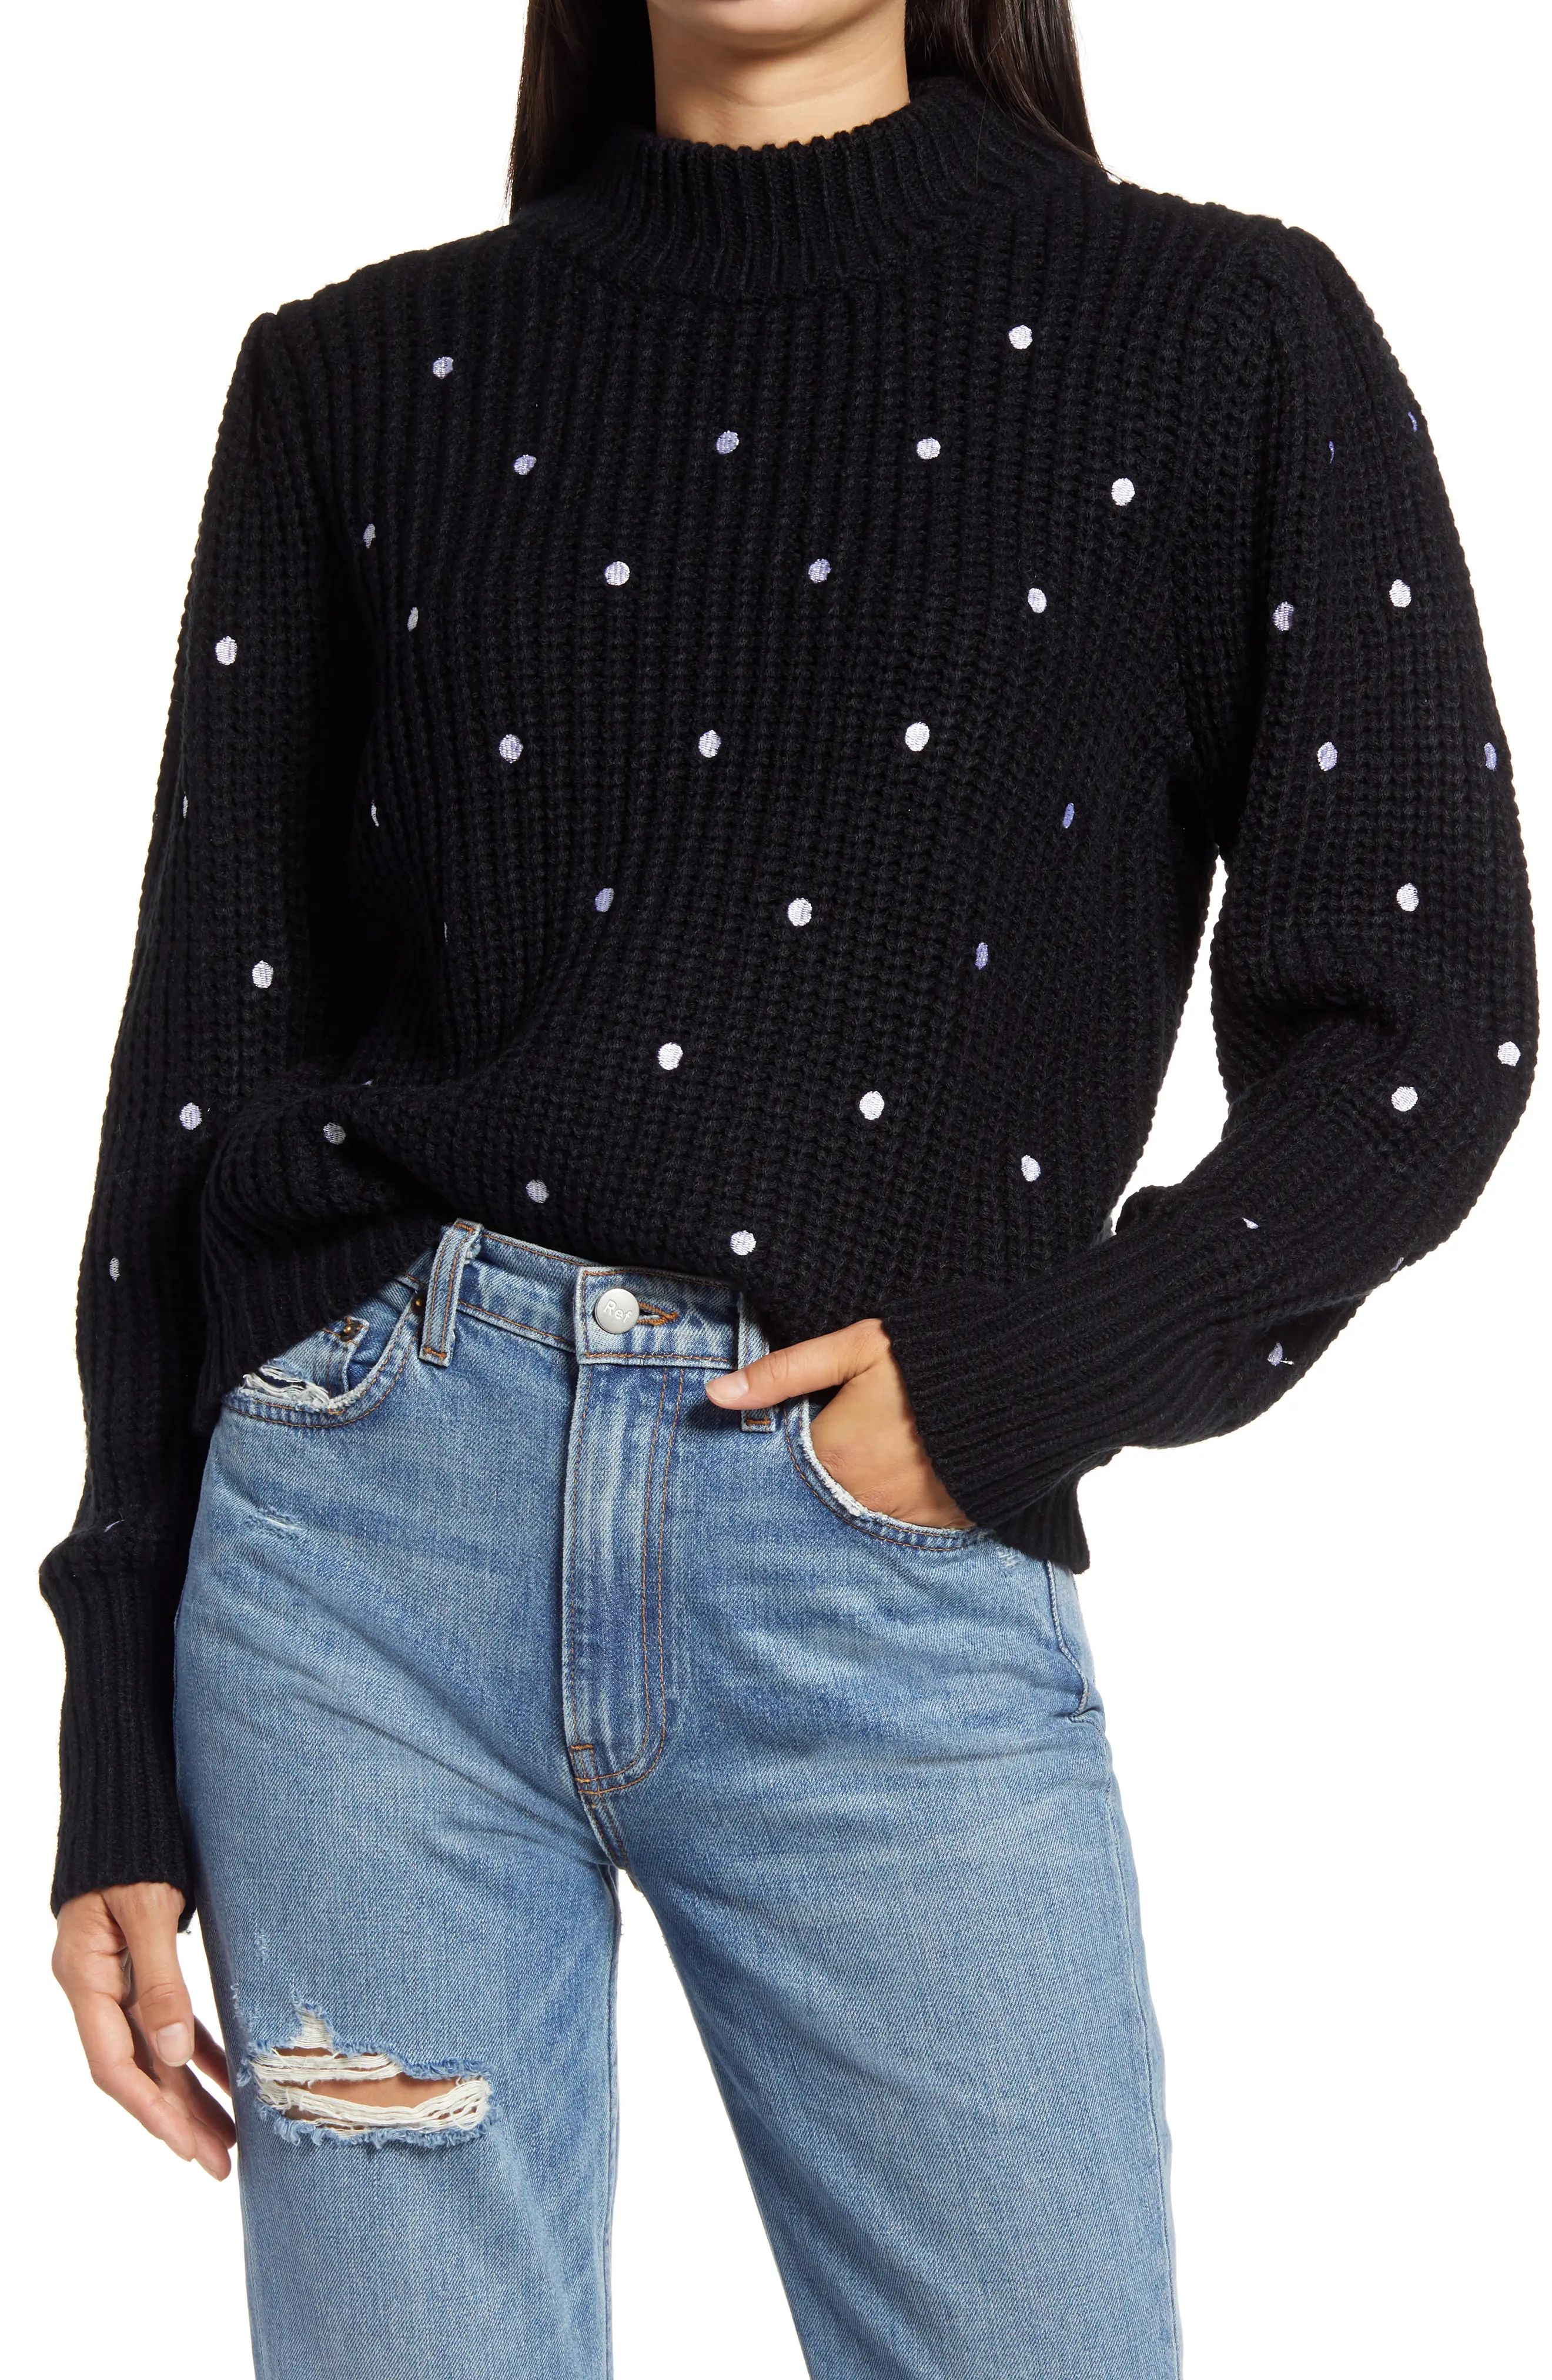 Women's English Factory Polka Dot Sweater, Size Small - Black | Nordstrom